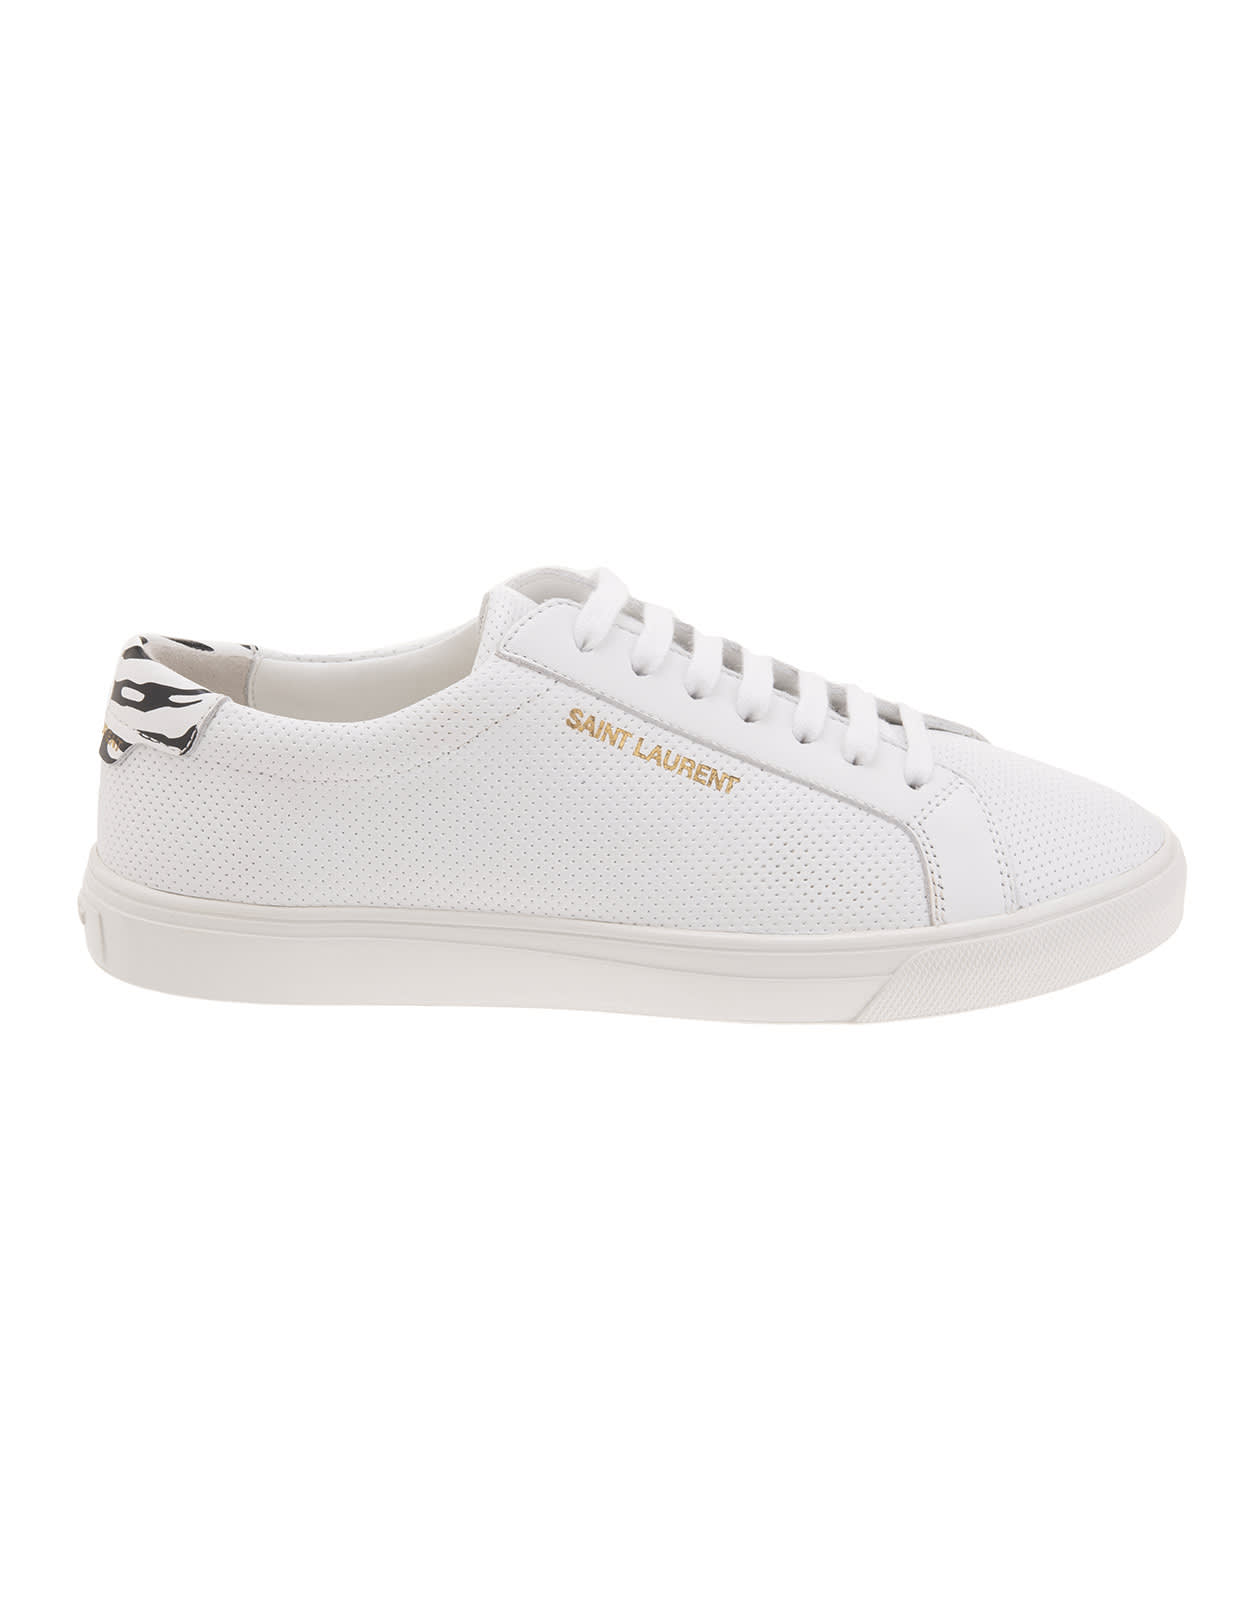 Photo of  Saint Laurent Woman Andy Sneakers In White Perforated Leather And Zebra Leather- shop Saint Laurent Sneakers online sales